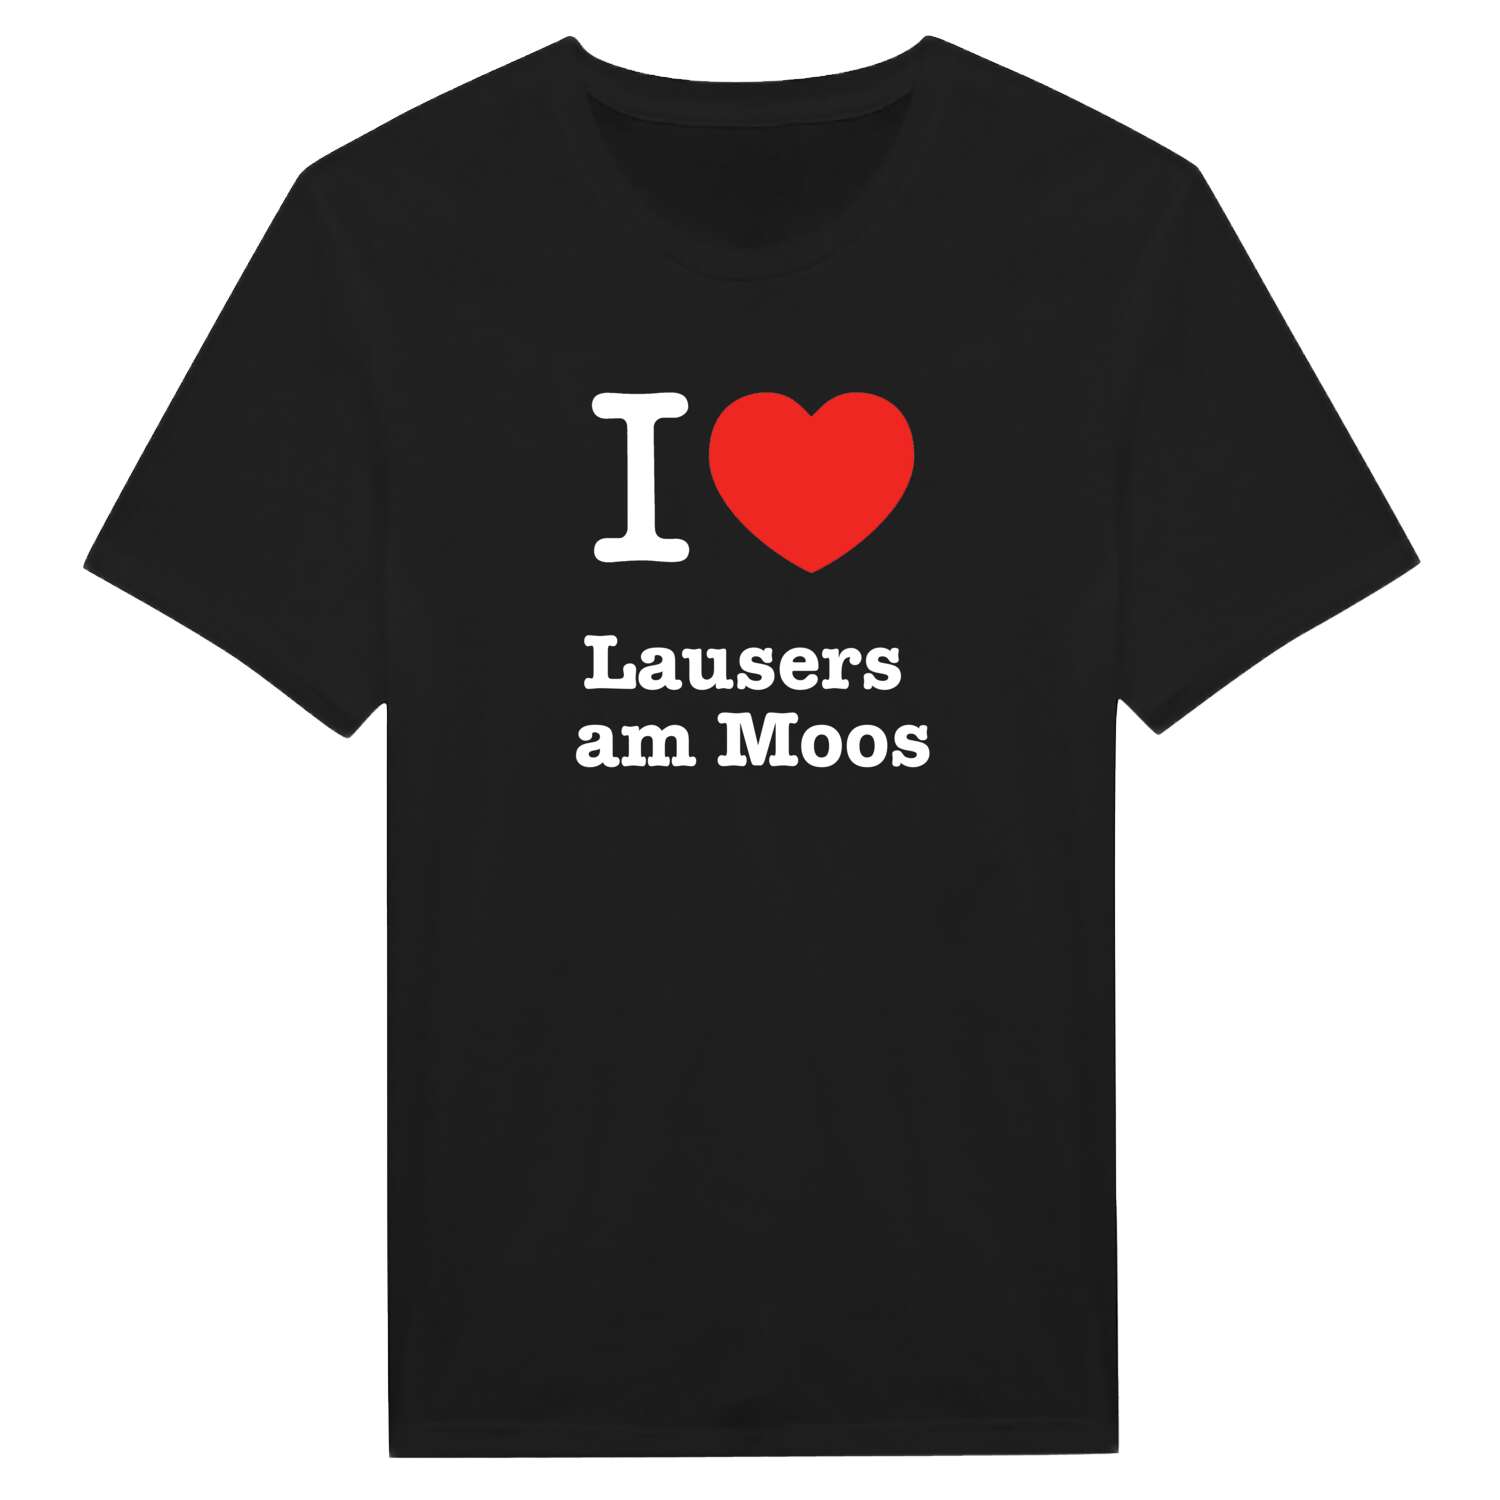 Lausers am Moos T-Shirt »I love«